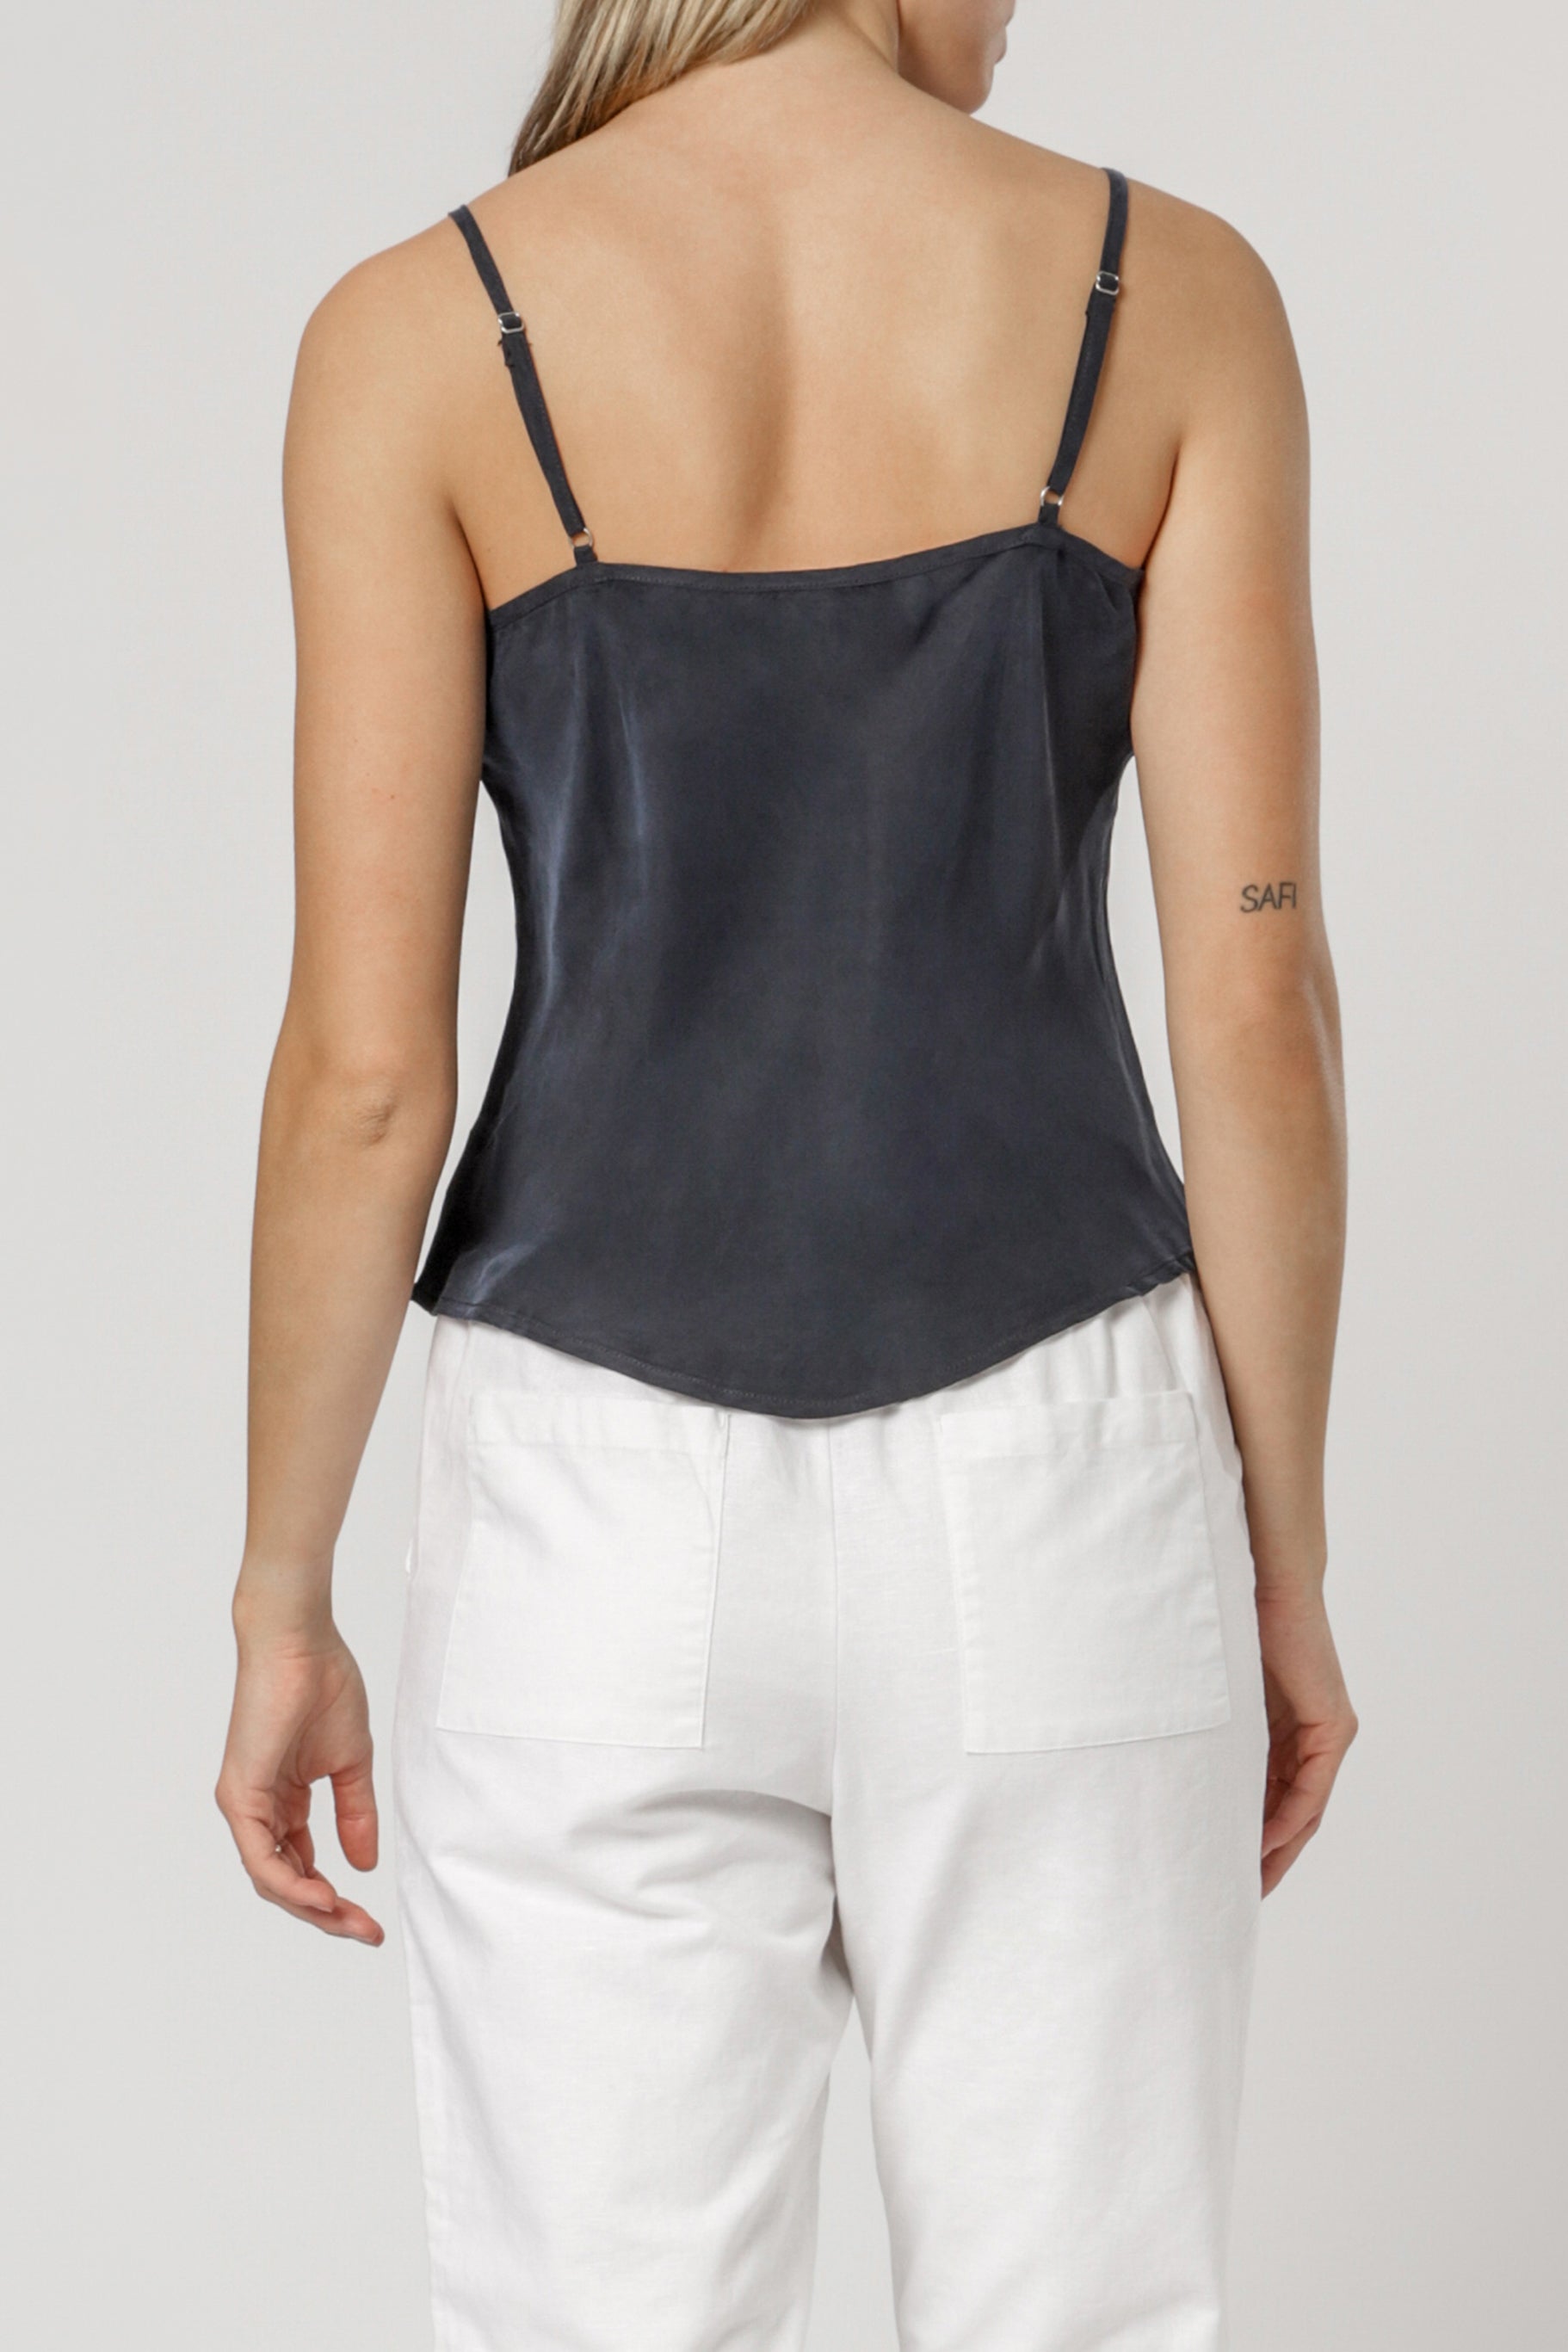 Nude Lucy Nude Classic Cami Midnight Top 